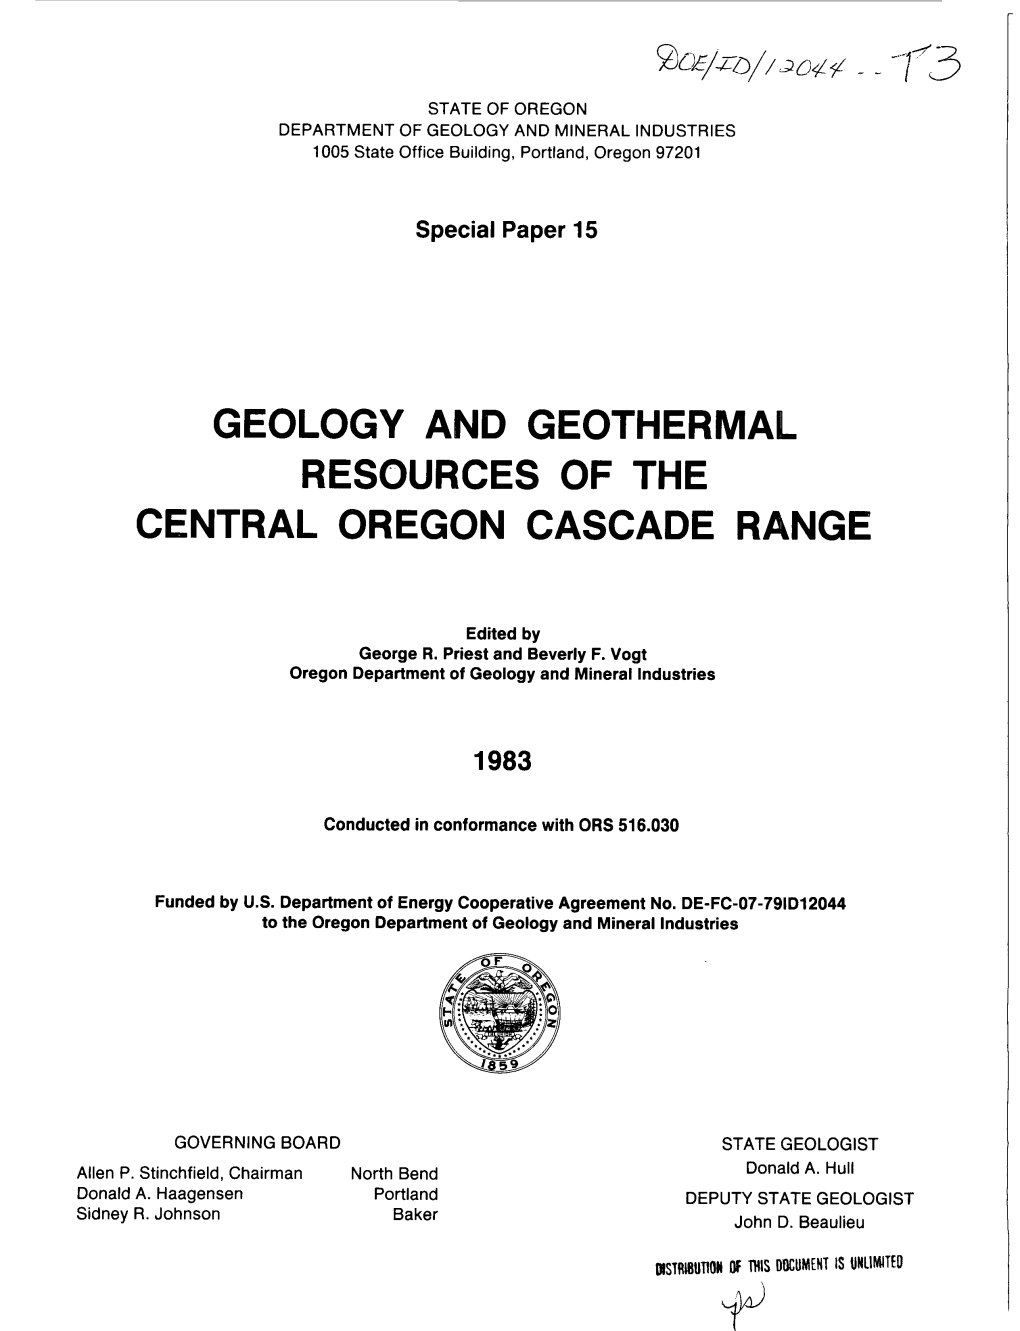 Geology and Geothermal Resources of the Central Oregon Cascade Range